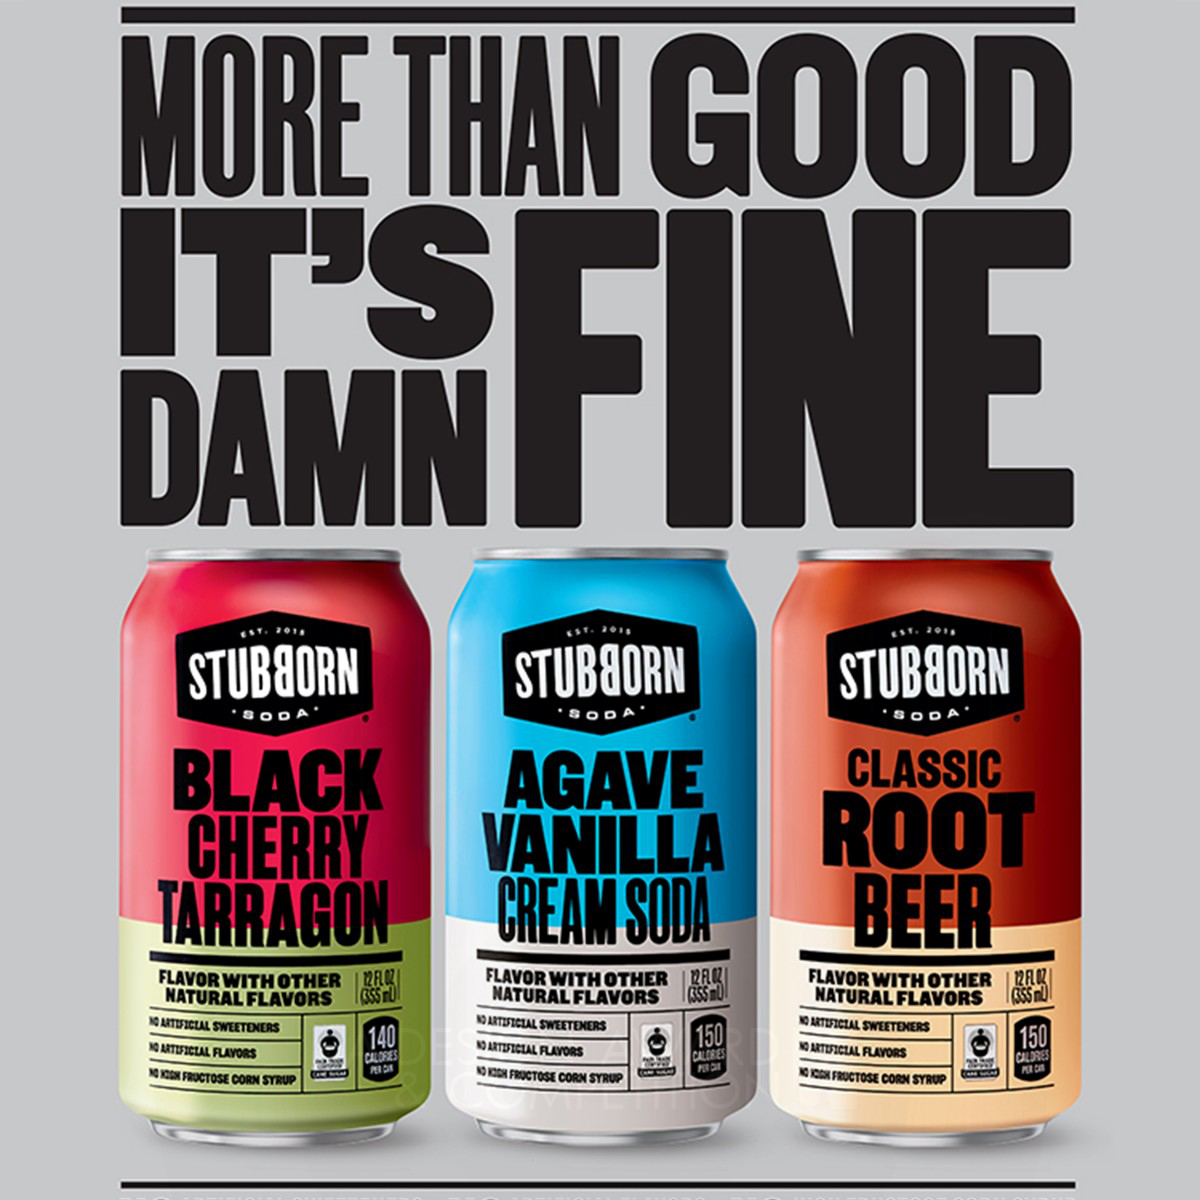 Stubborn Soda Cans Packaging by PepsiCo Design and Innovation Iron Packaging Design Award Winner 2020 